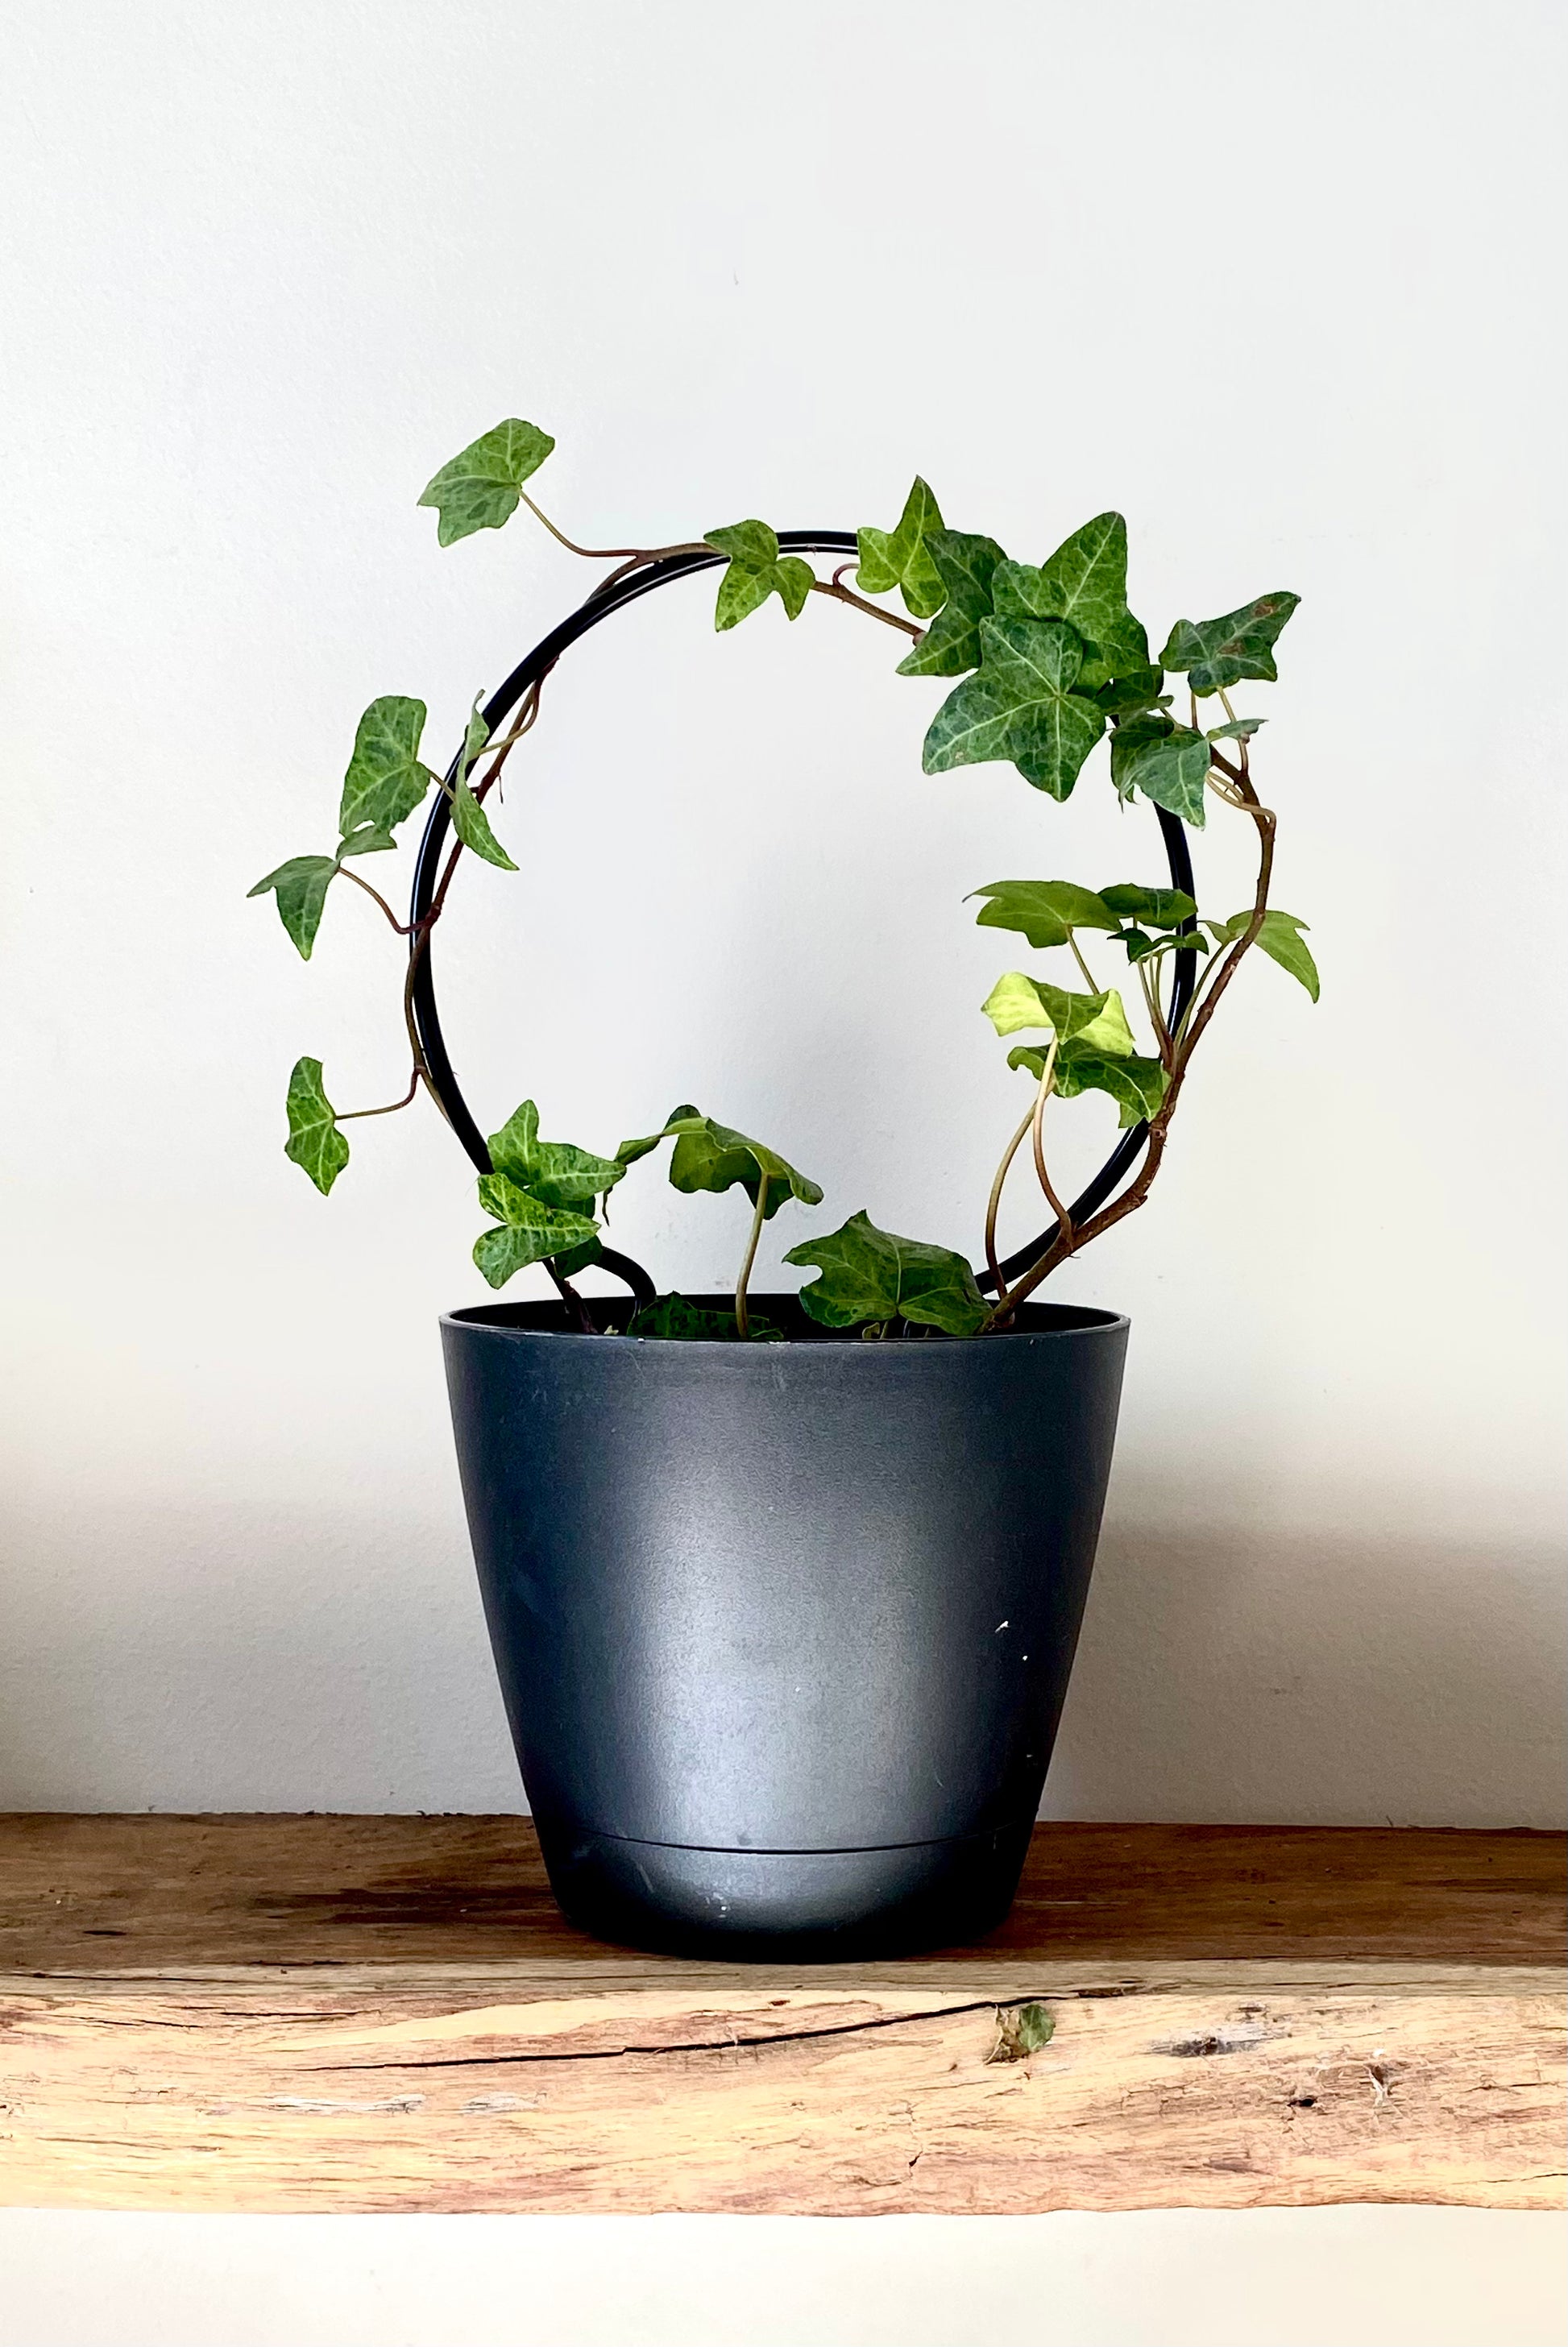 A Mini Round plant trellis with green ivy growing around it in a black plant pot on a wooden shelf